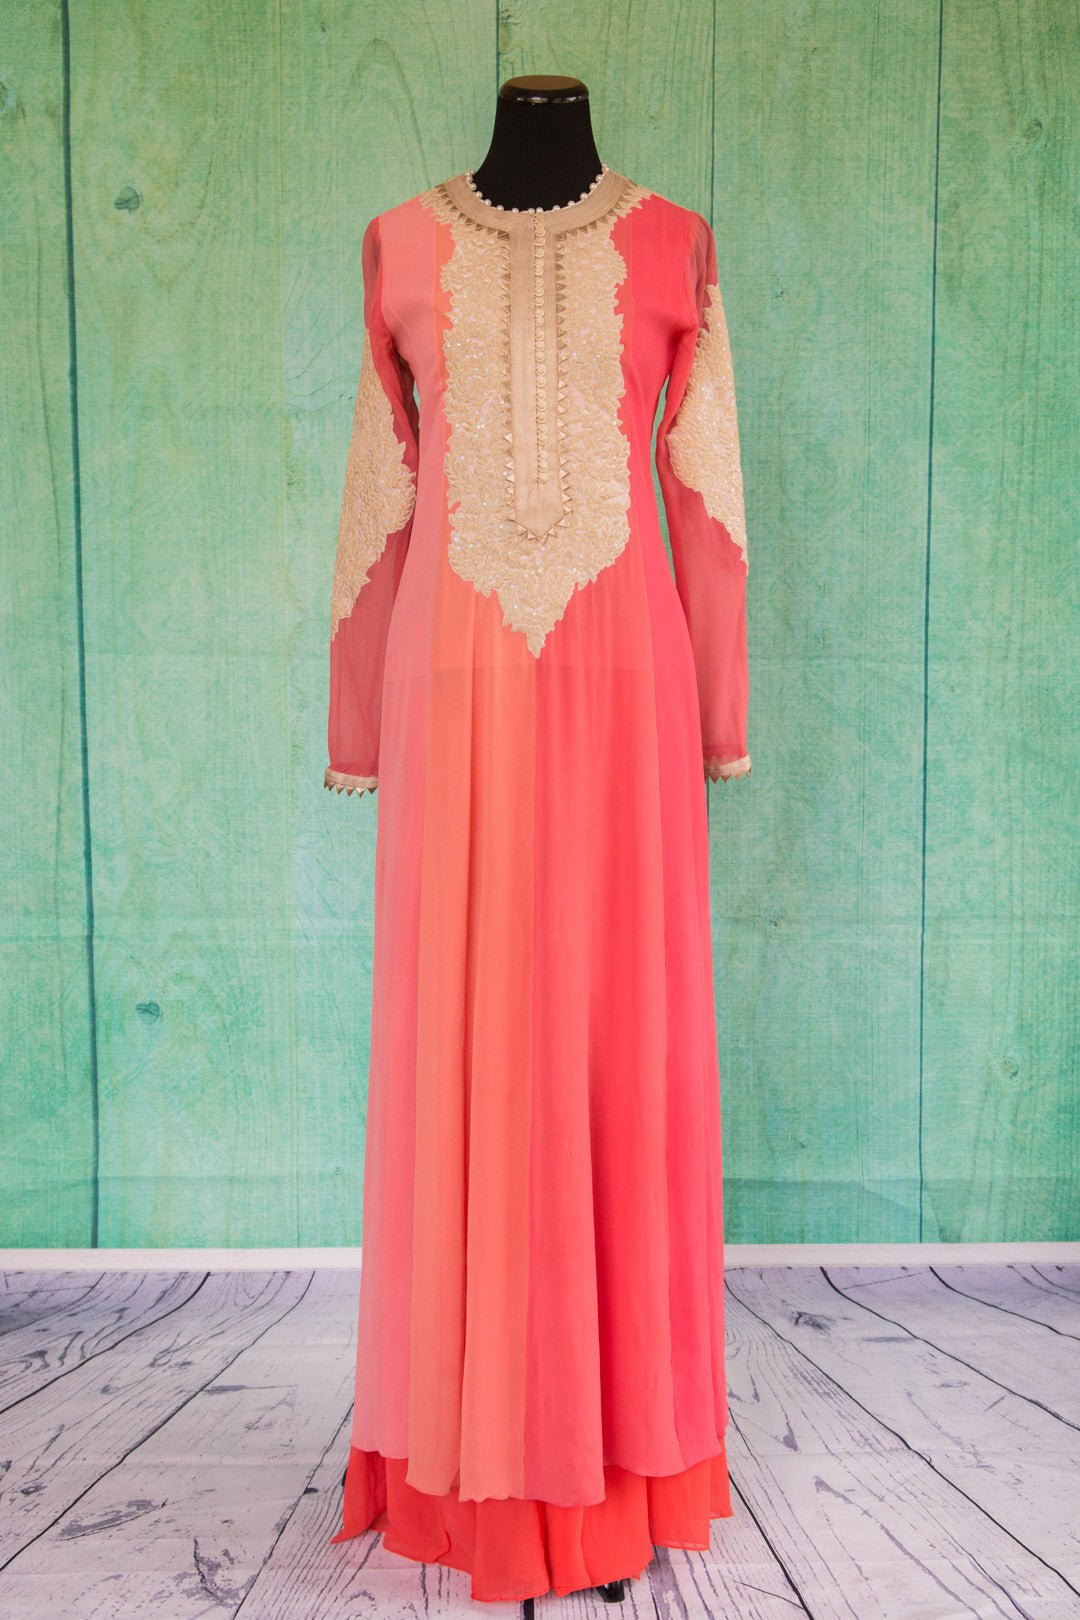 501099-suit-long-sleeve-pink-coral-pearl-collar-lace-embroidery